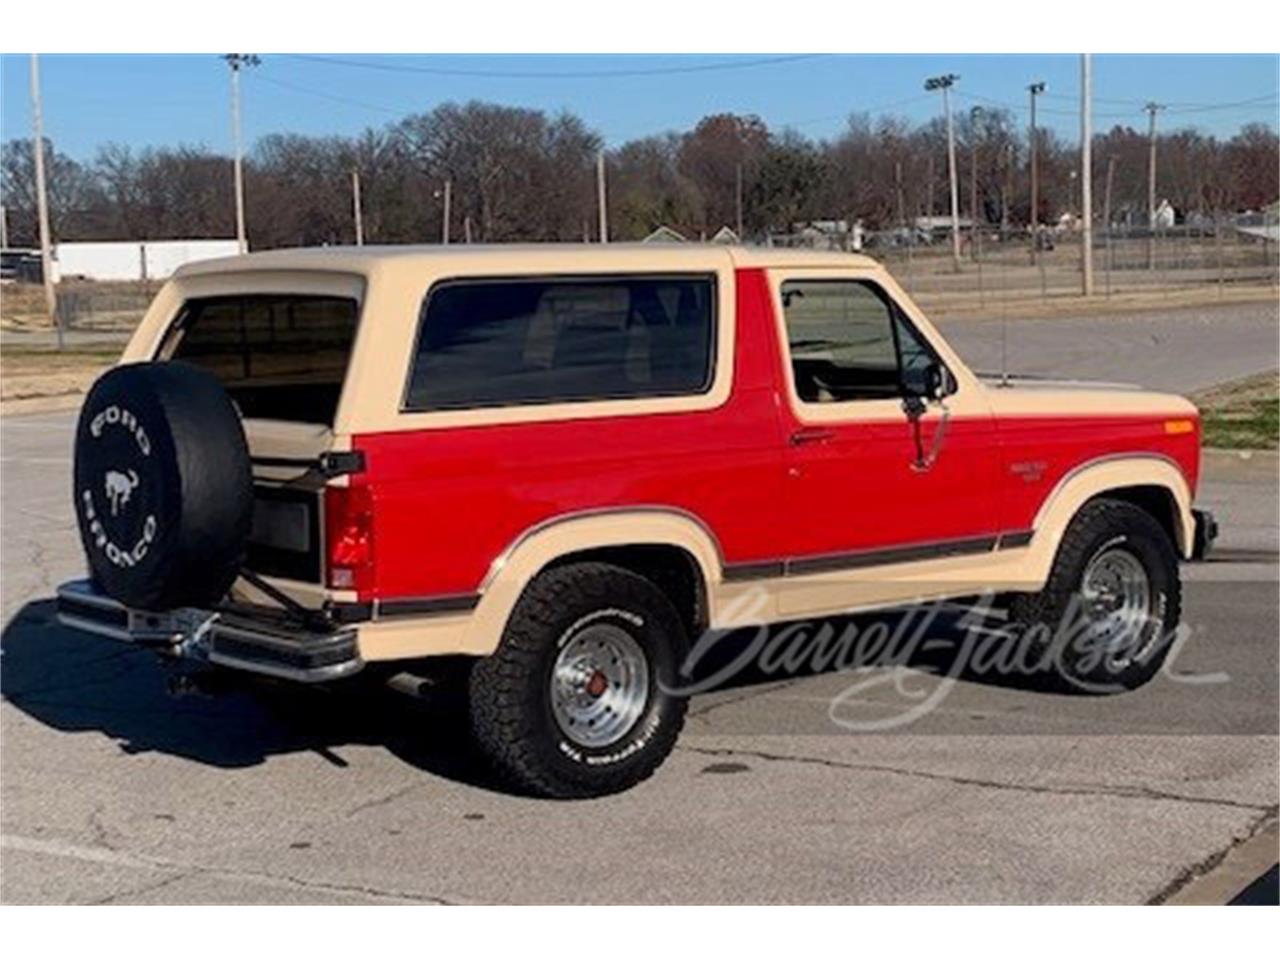 For Sale at Auction: 1983 Ford Bronco in Scottsdale, Arizona for sale in Scottsdale, AZ